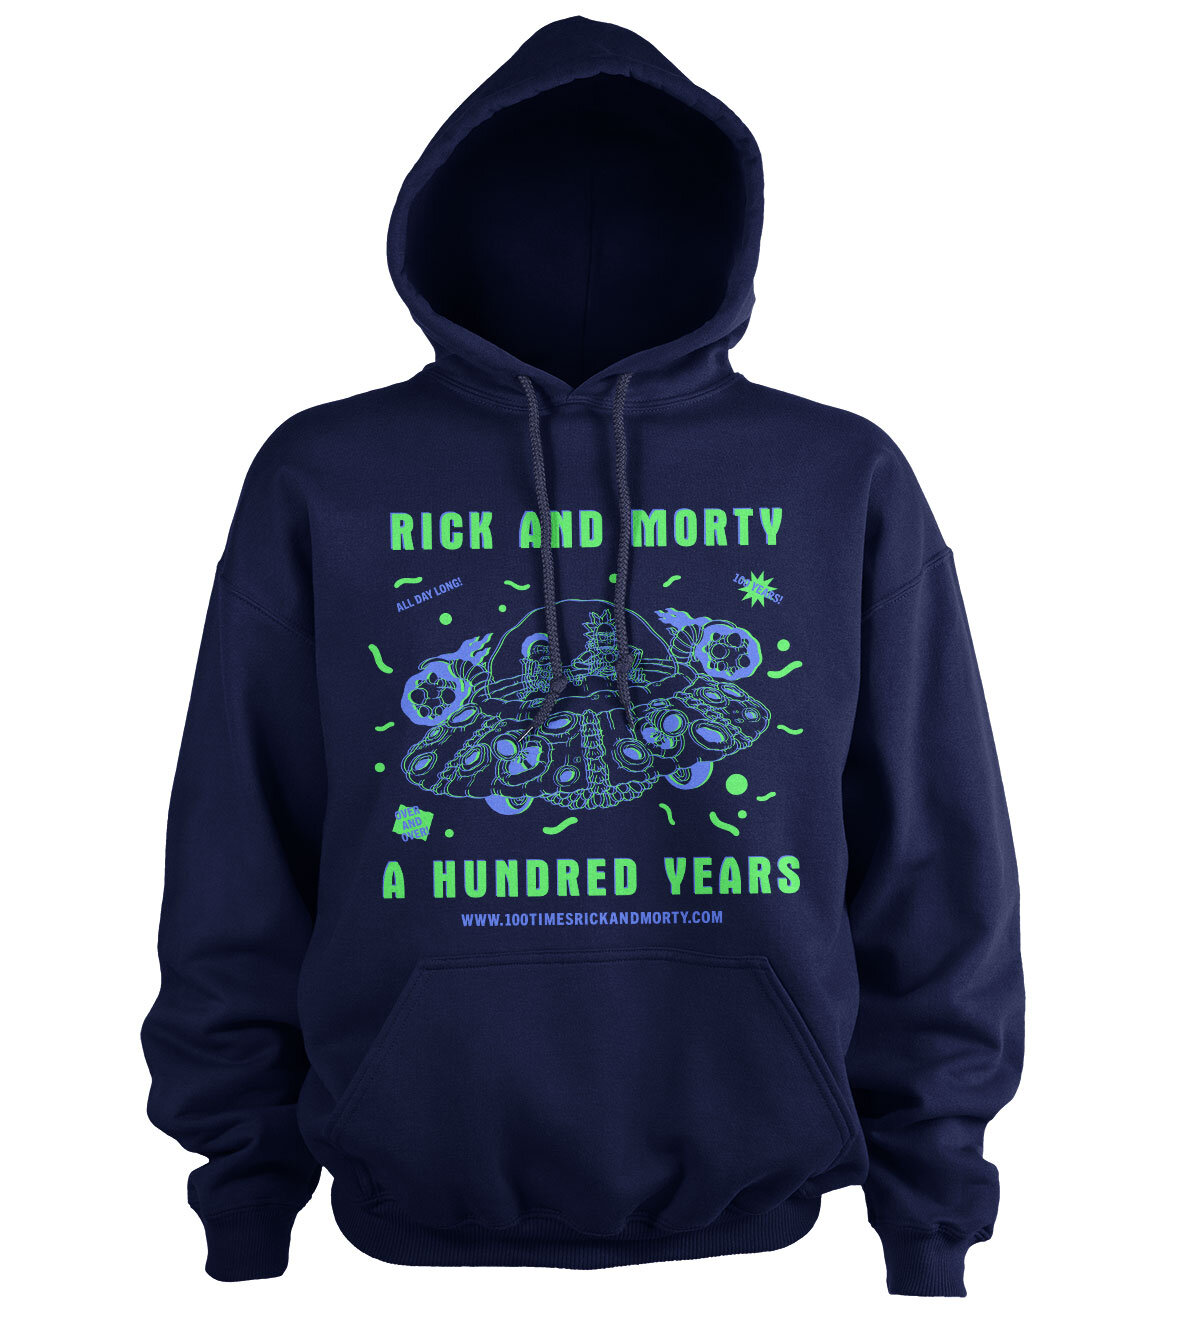 Rick And Morty - A Hundred Years Hoodie